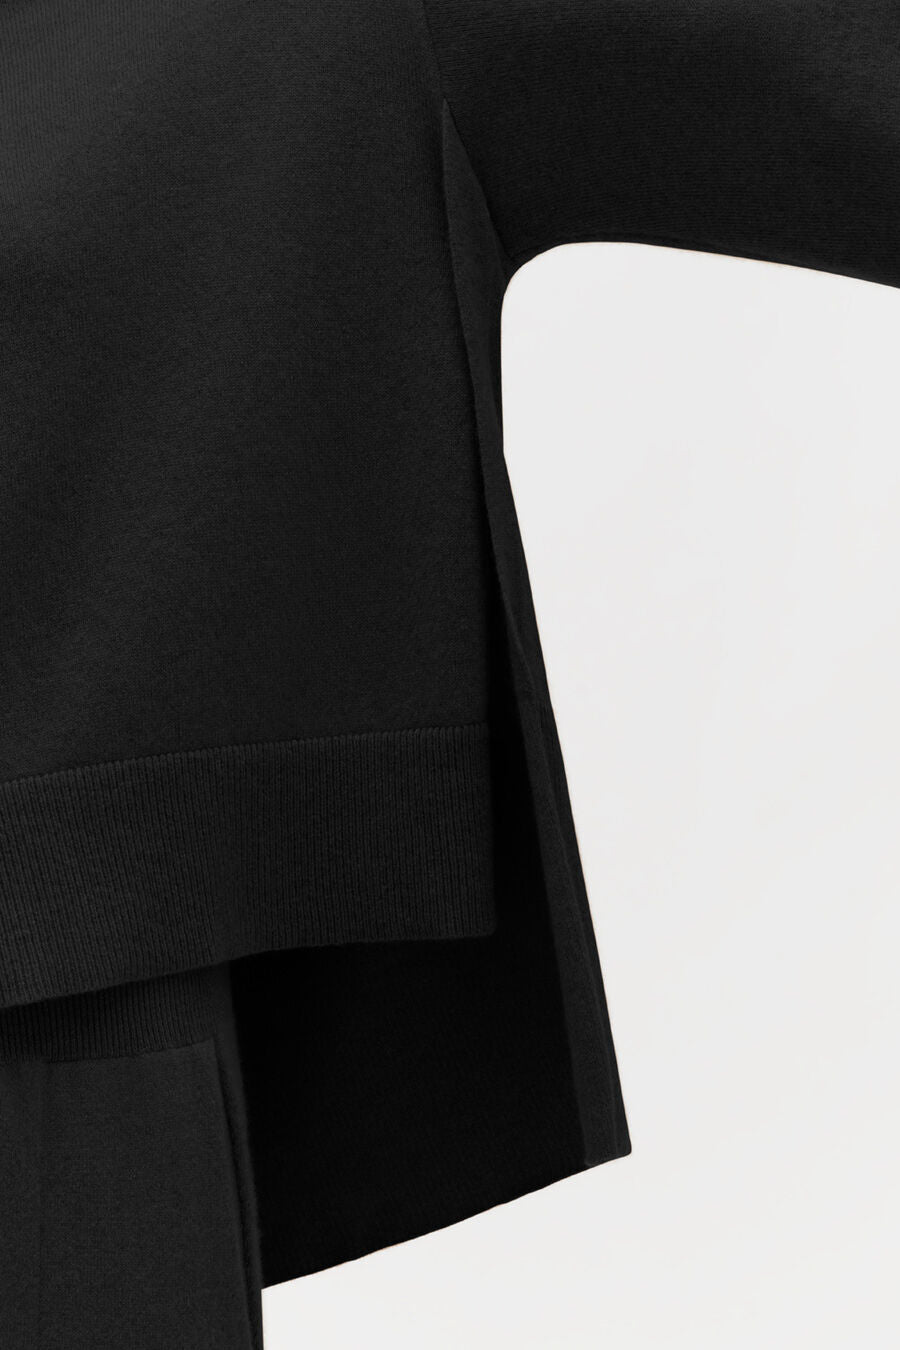 Close-up of a sleeve and side seam of a garment.